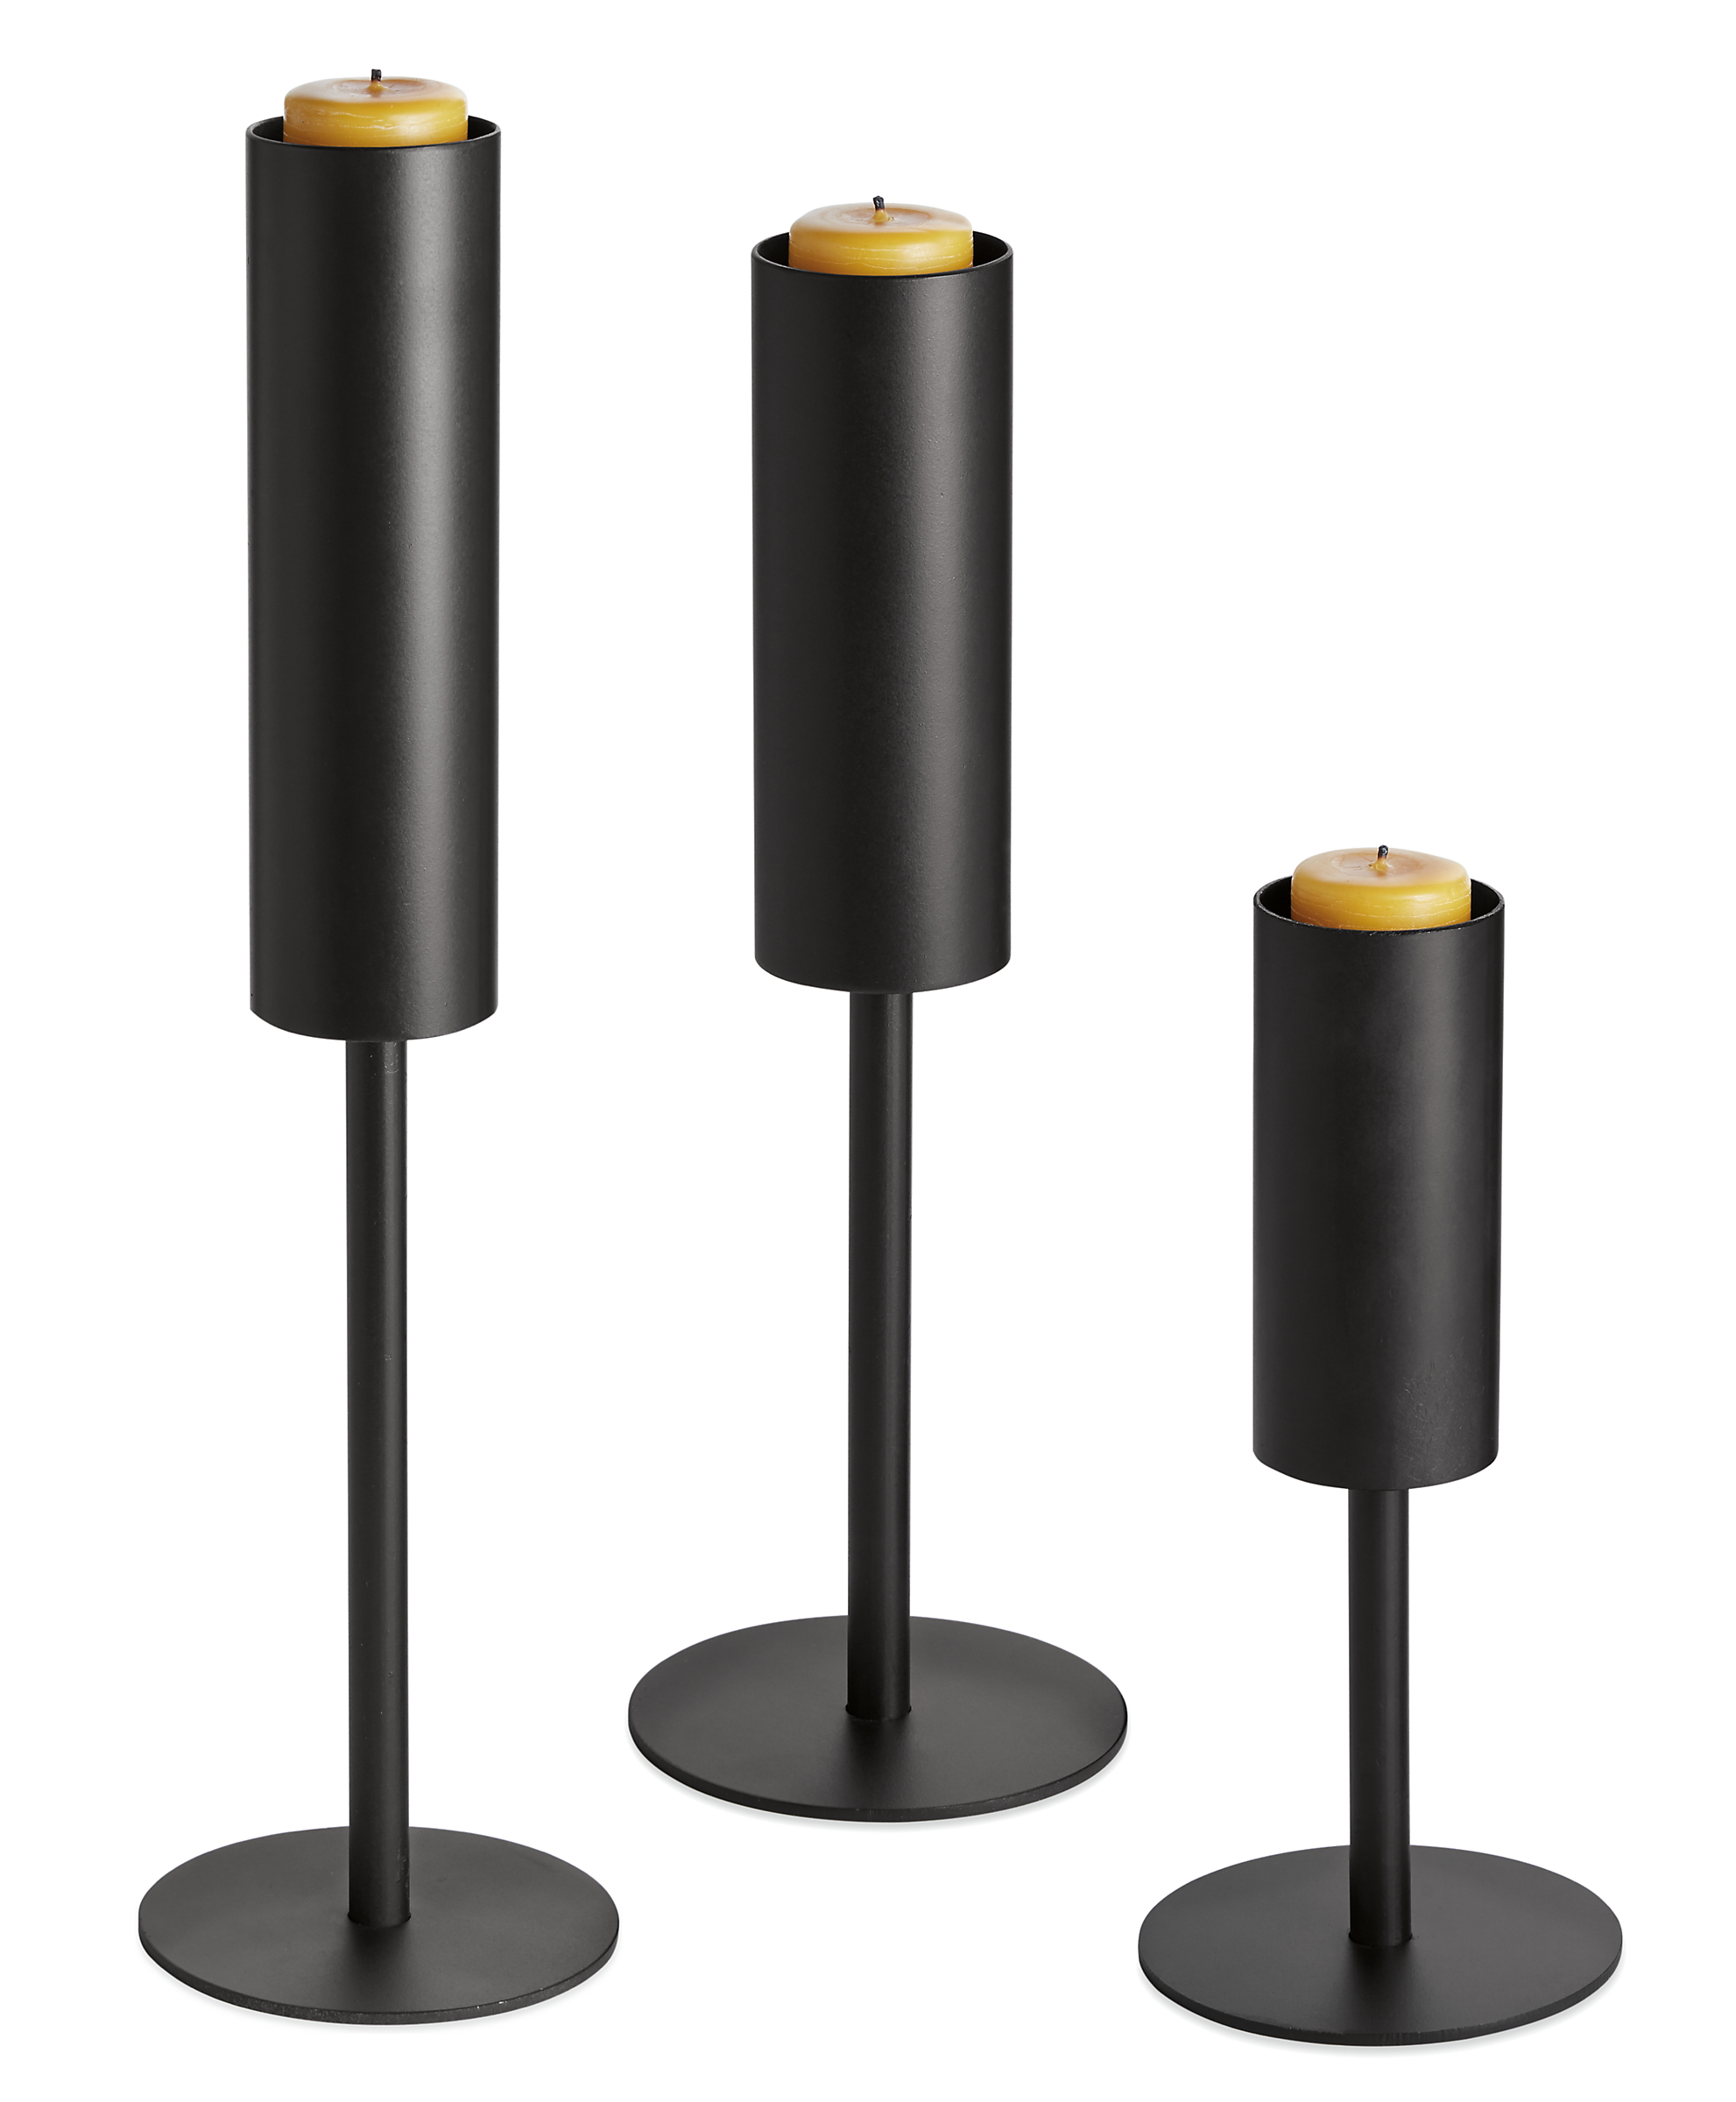 Lucent Votive Candle Holders in Graphite